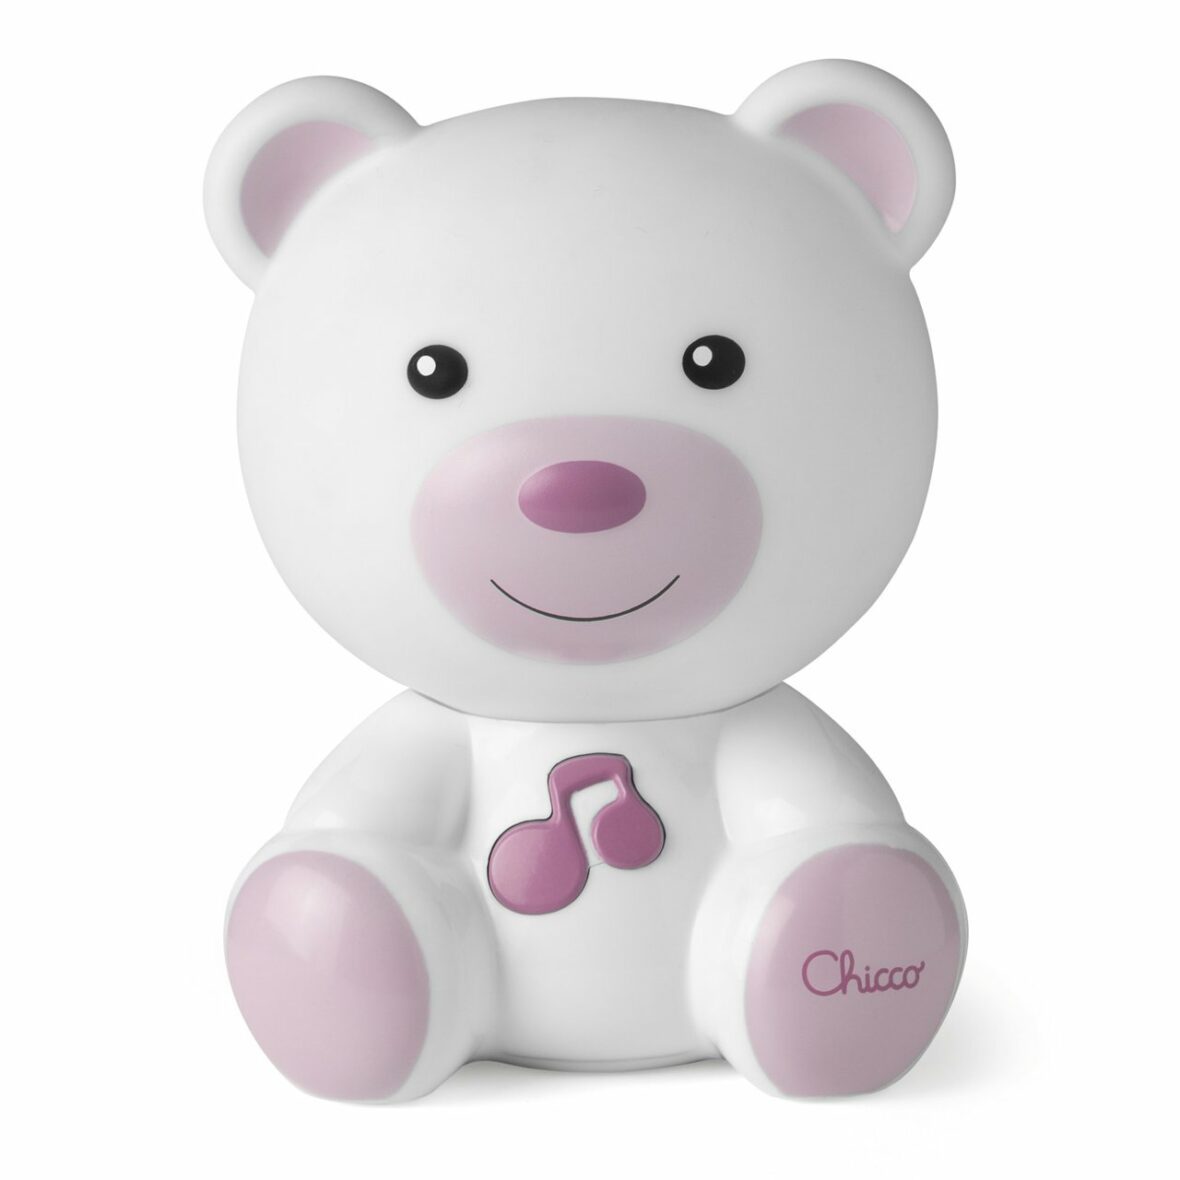 Veilleuse Musicale chicco Dreamlight